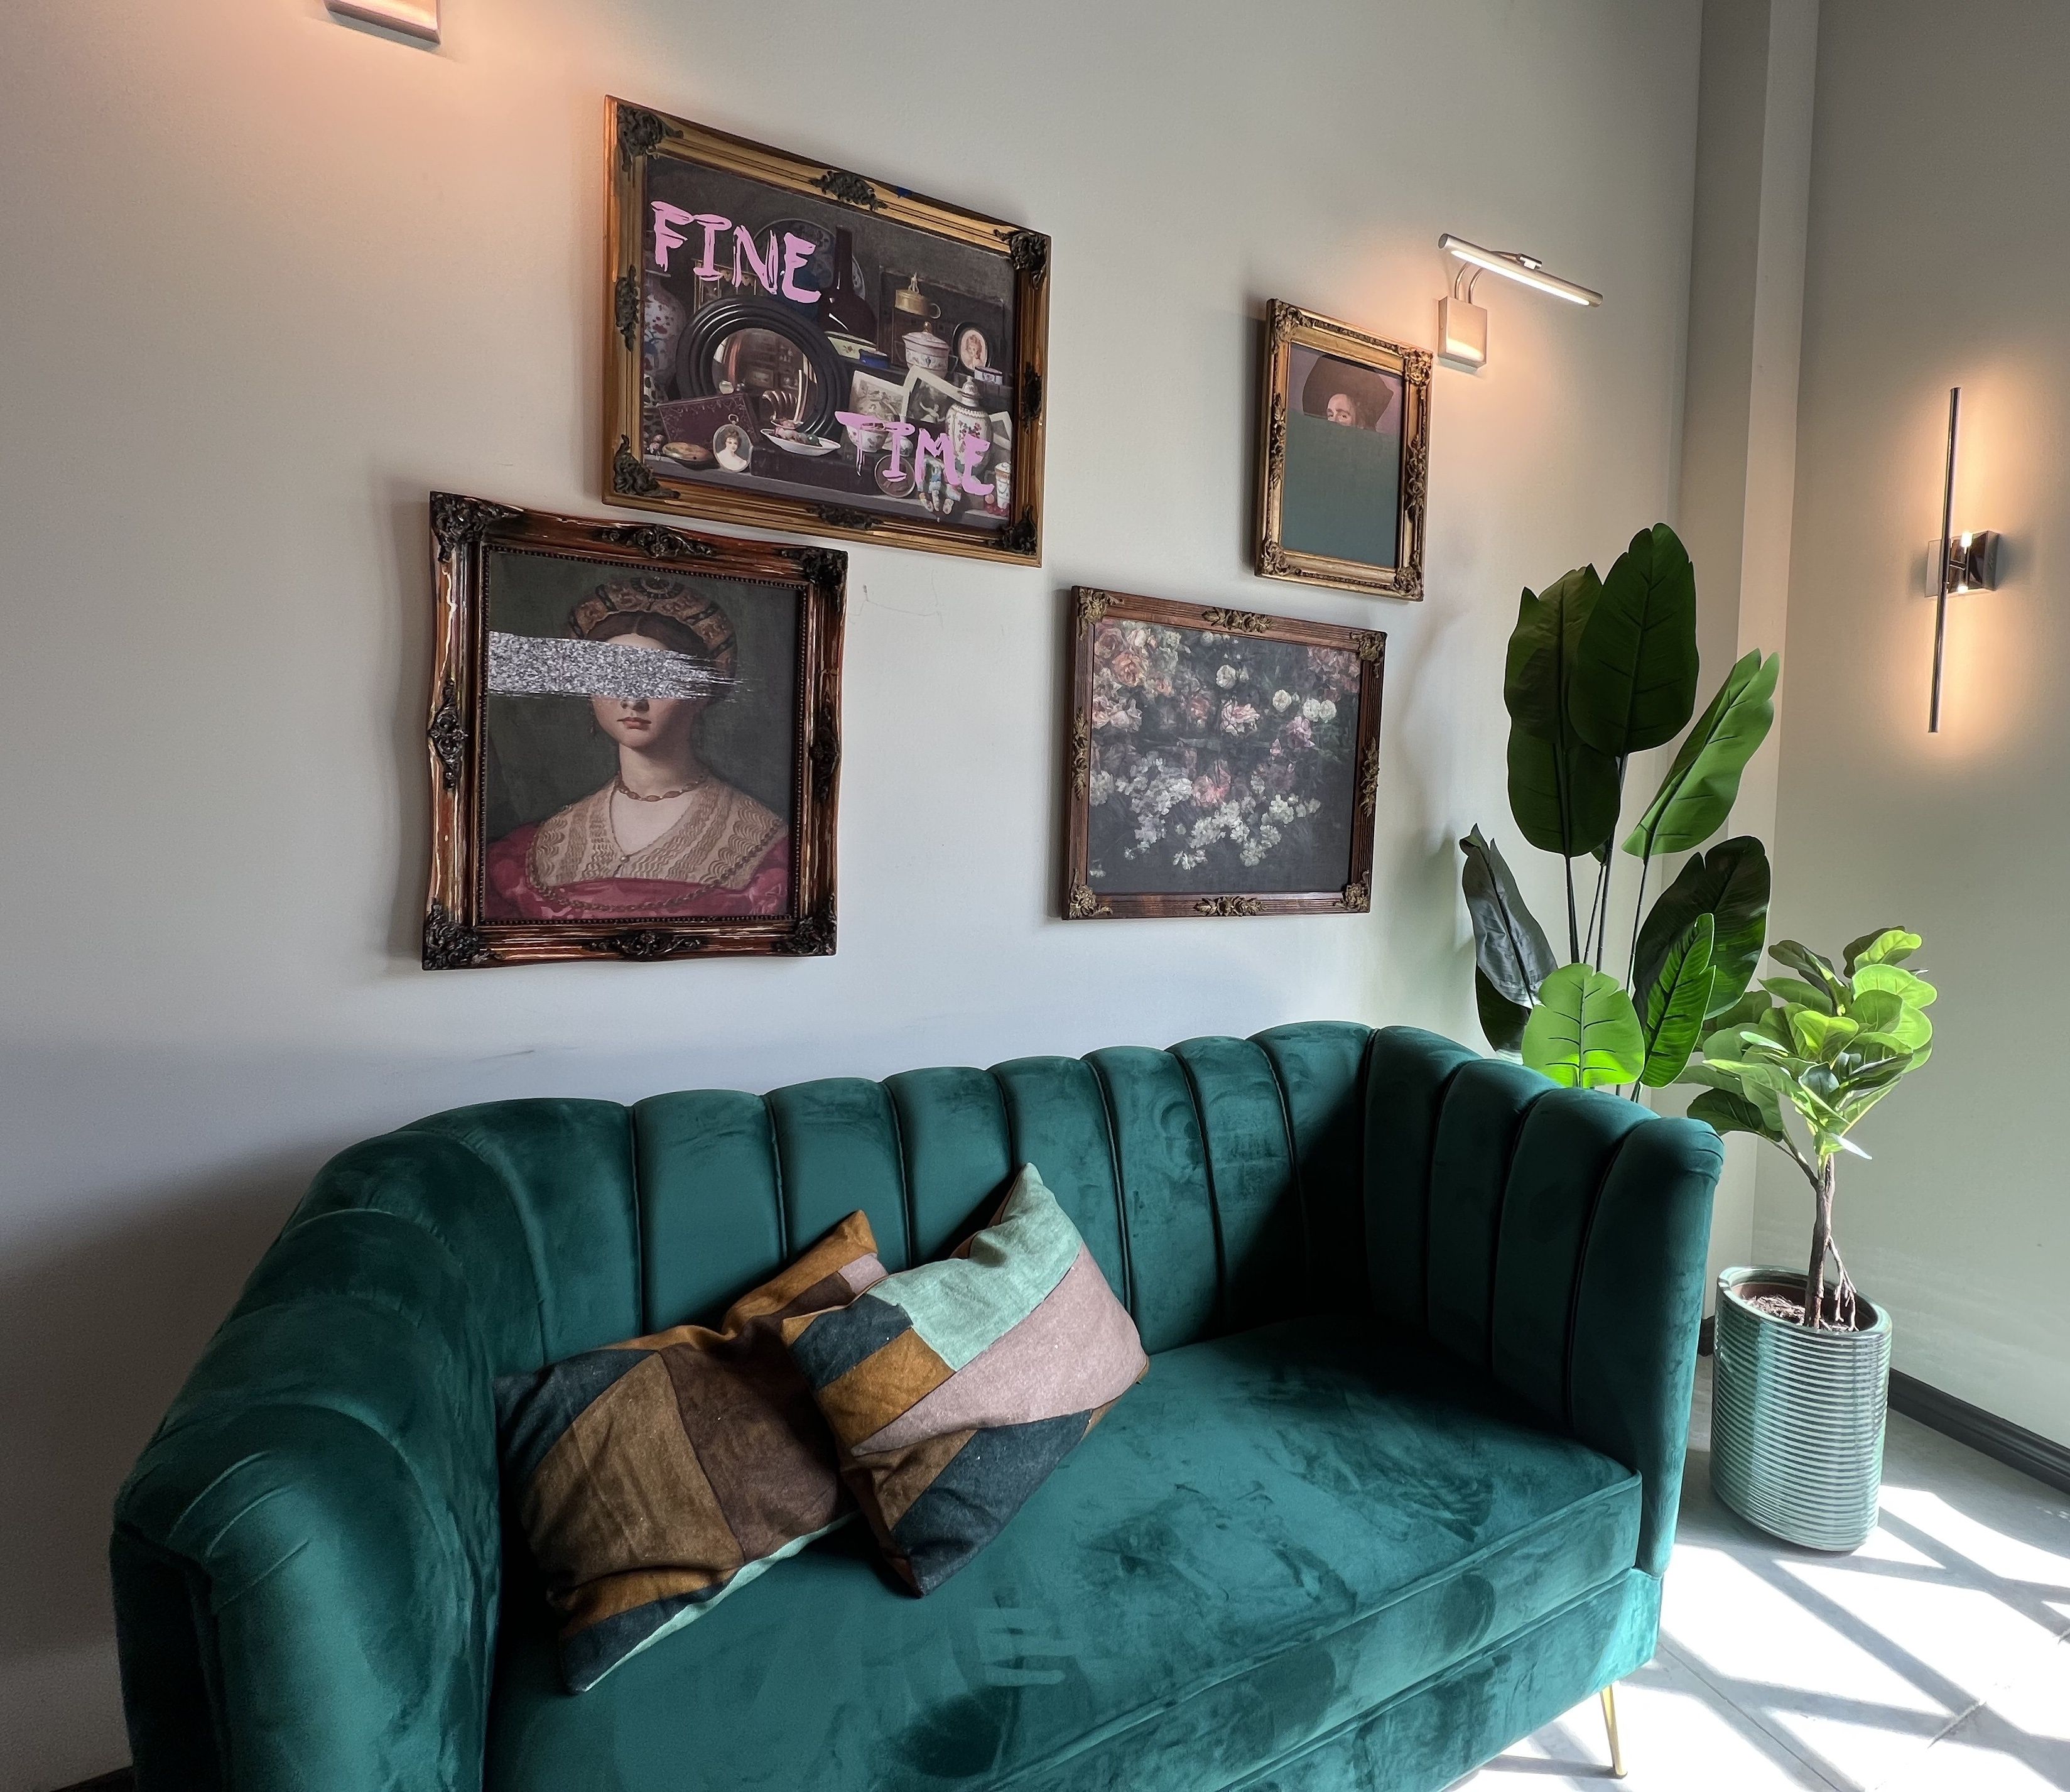 A green velvet couch below art on the wall and by green plants in the corner.